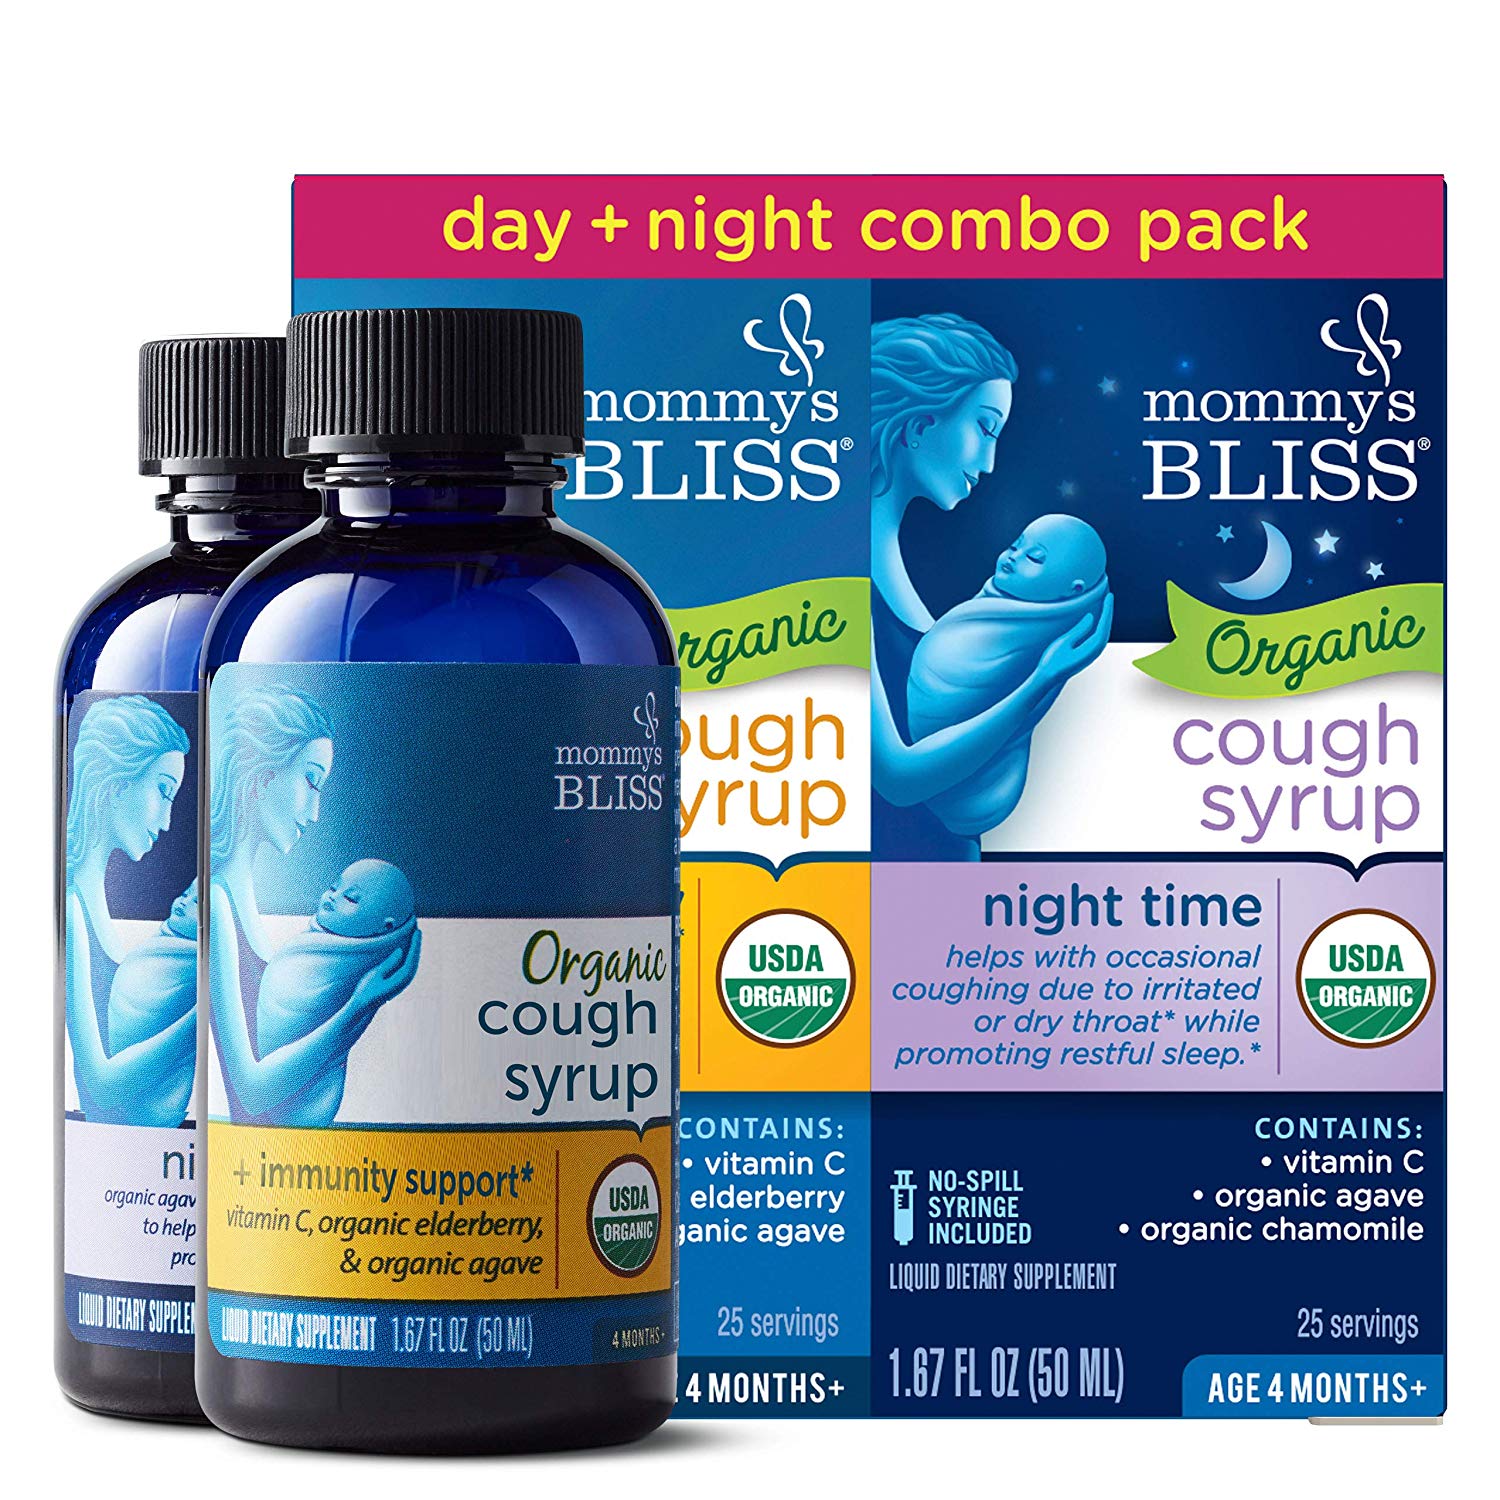 Mommy’s Bliss Organic Baby Cough Syrup